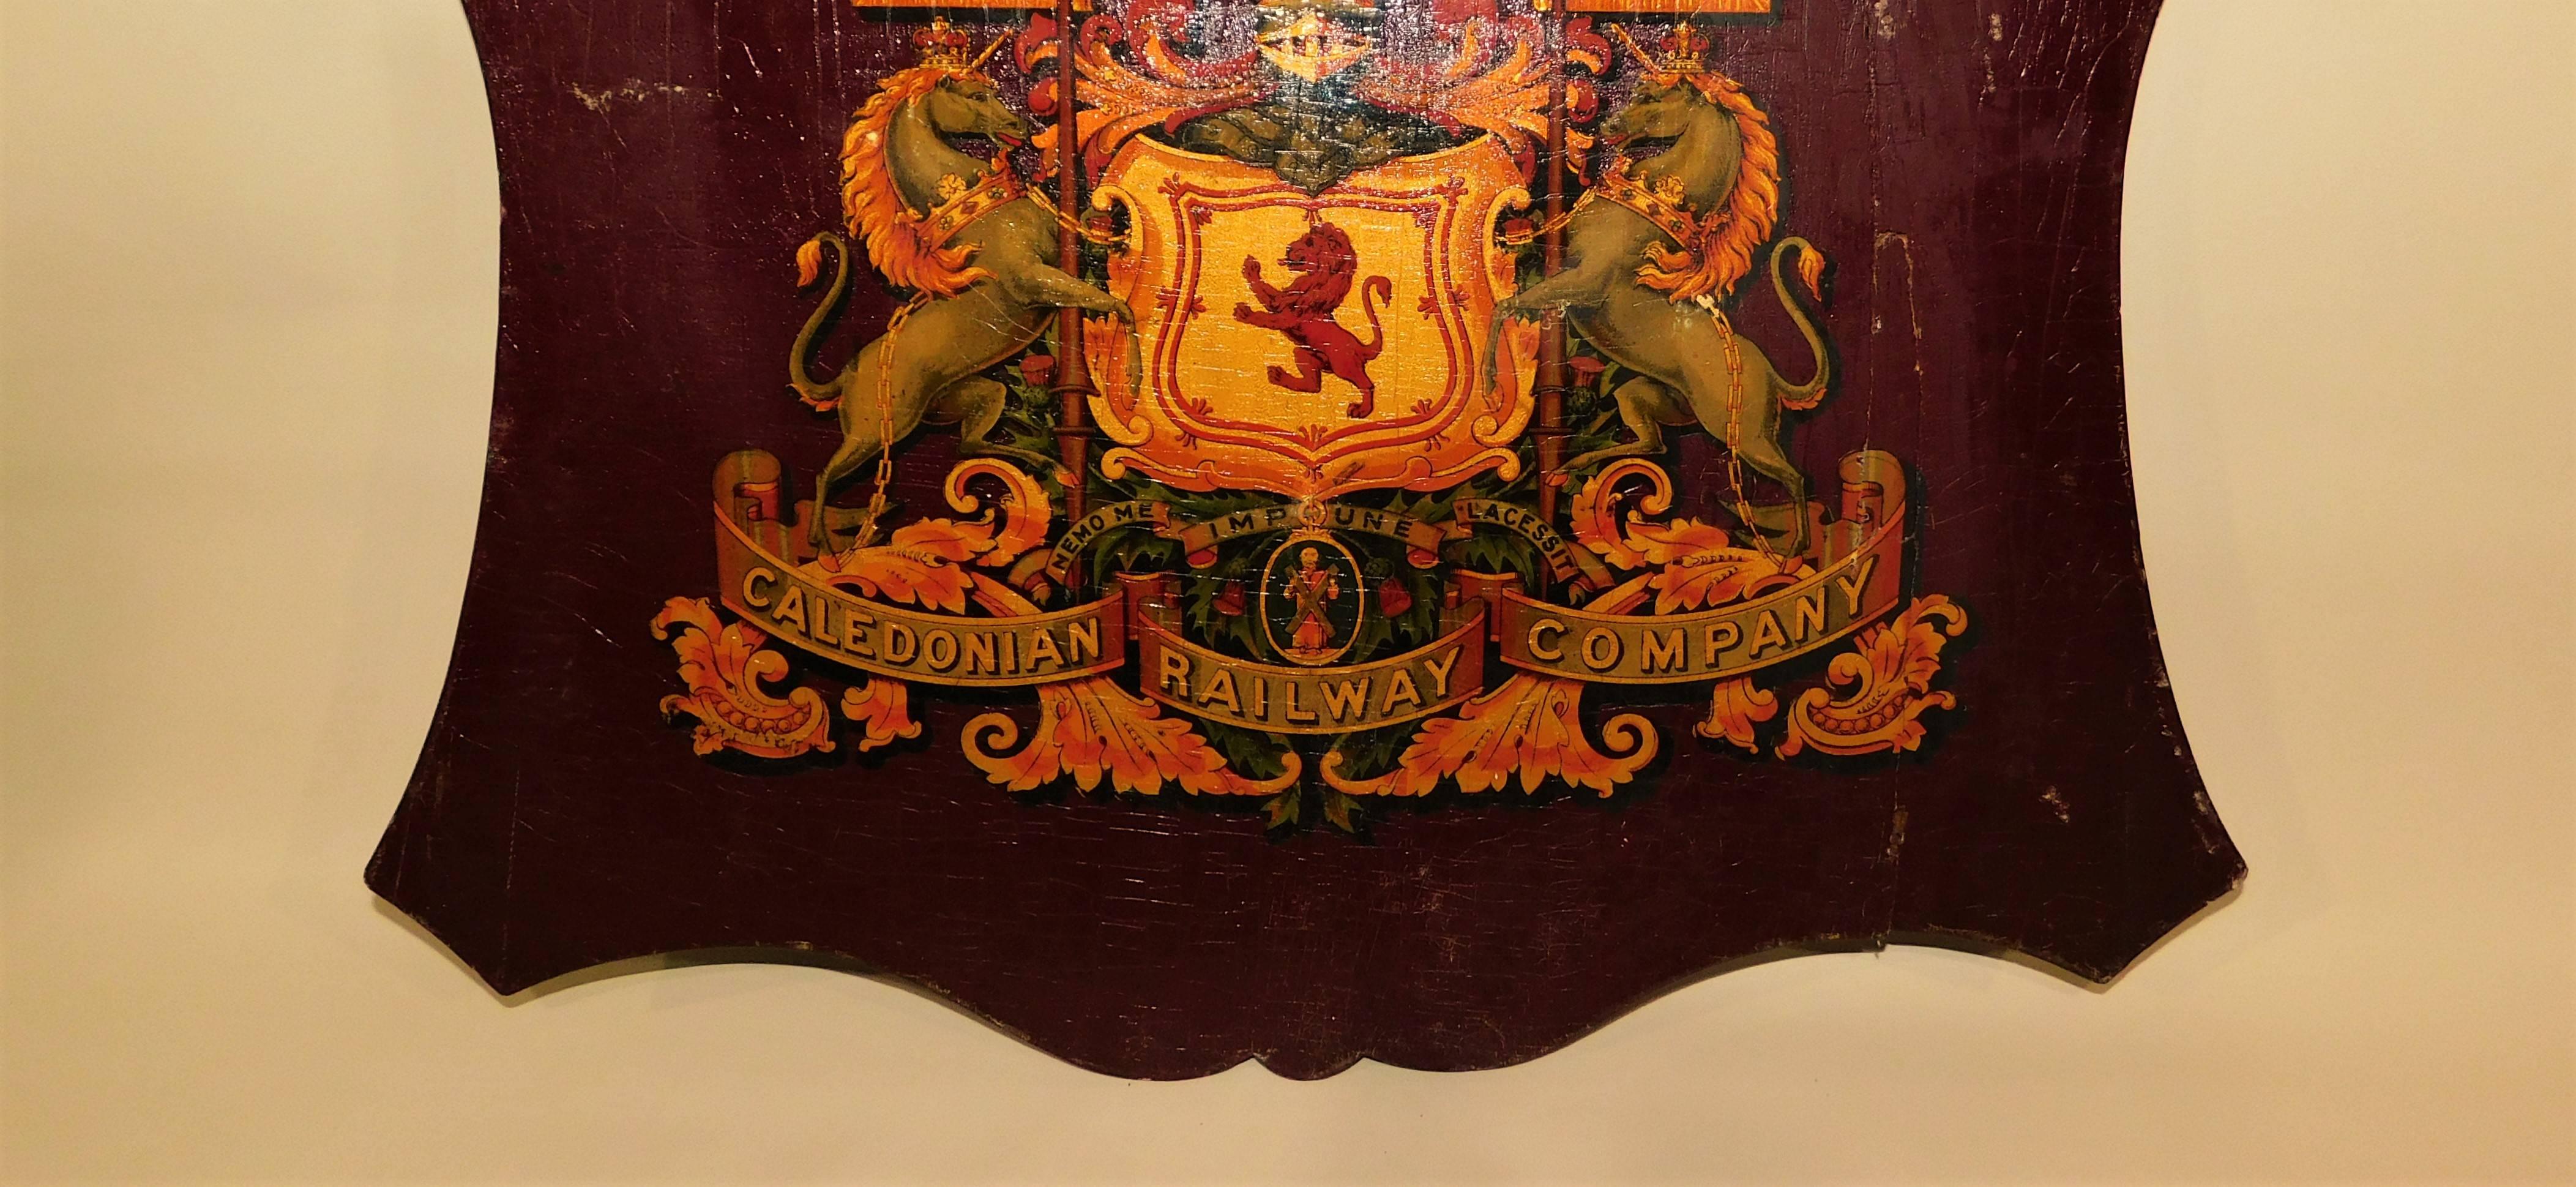 Caledonian Railway Company Coat of Arms on a Wooden Shield 19th Century Sign 2